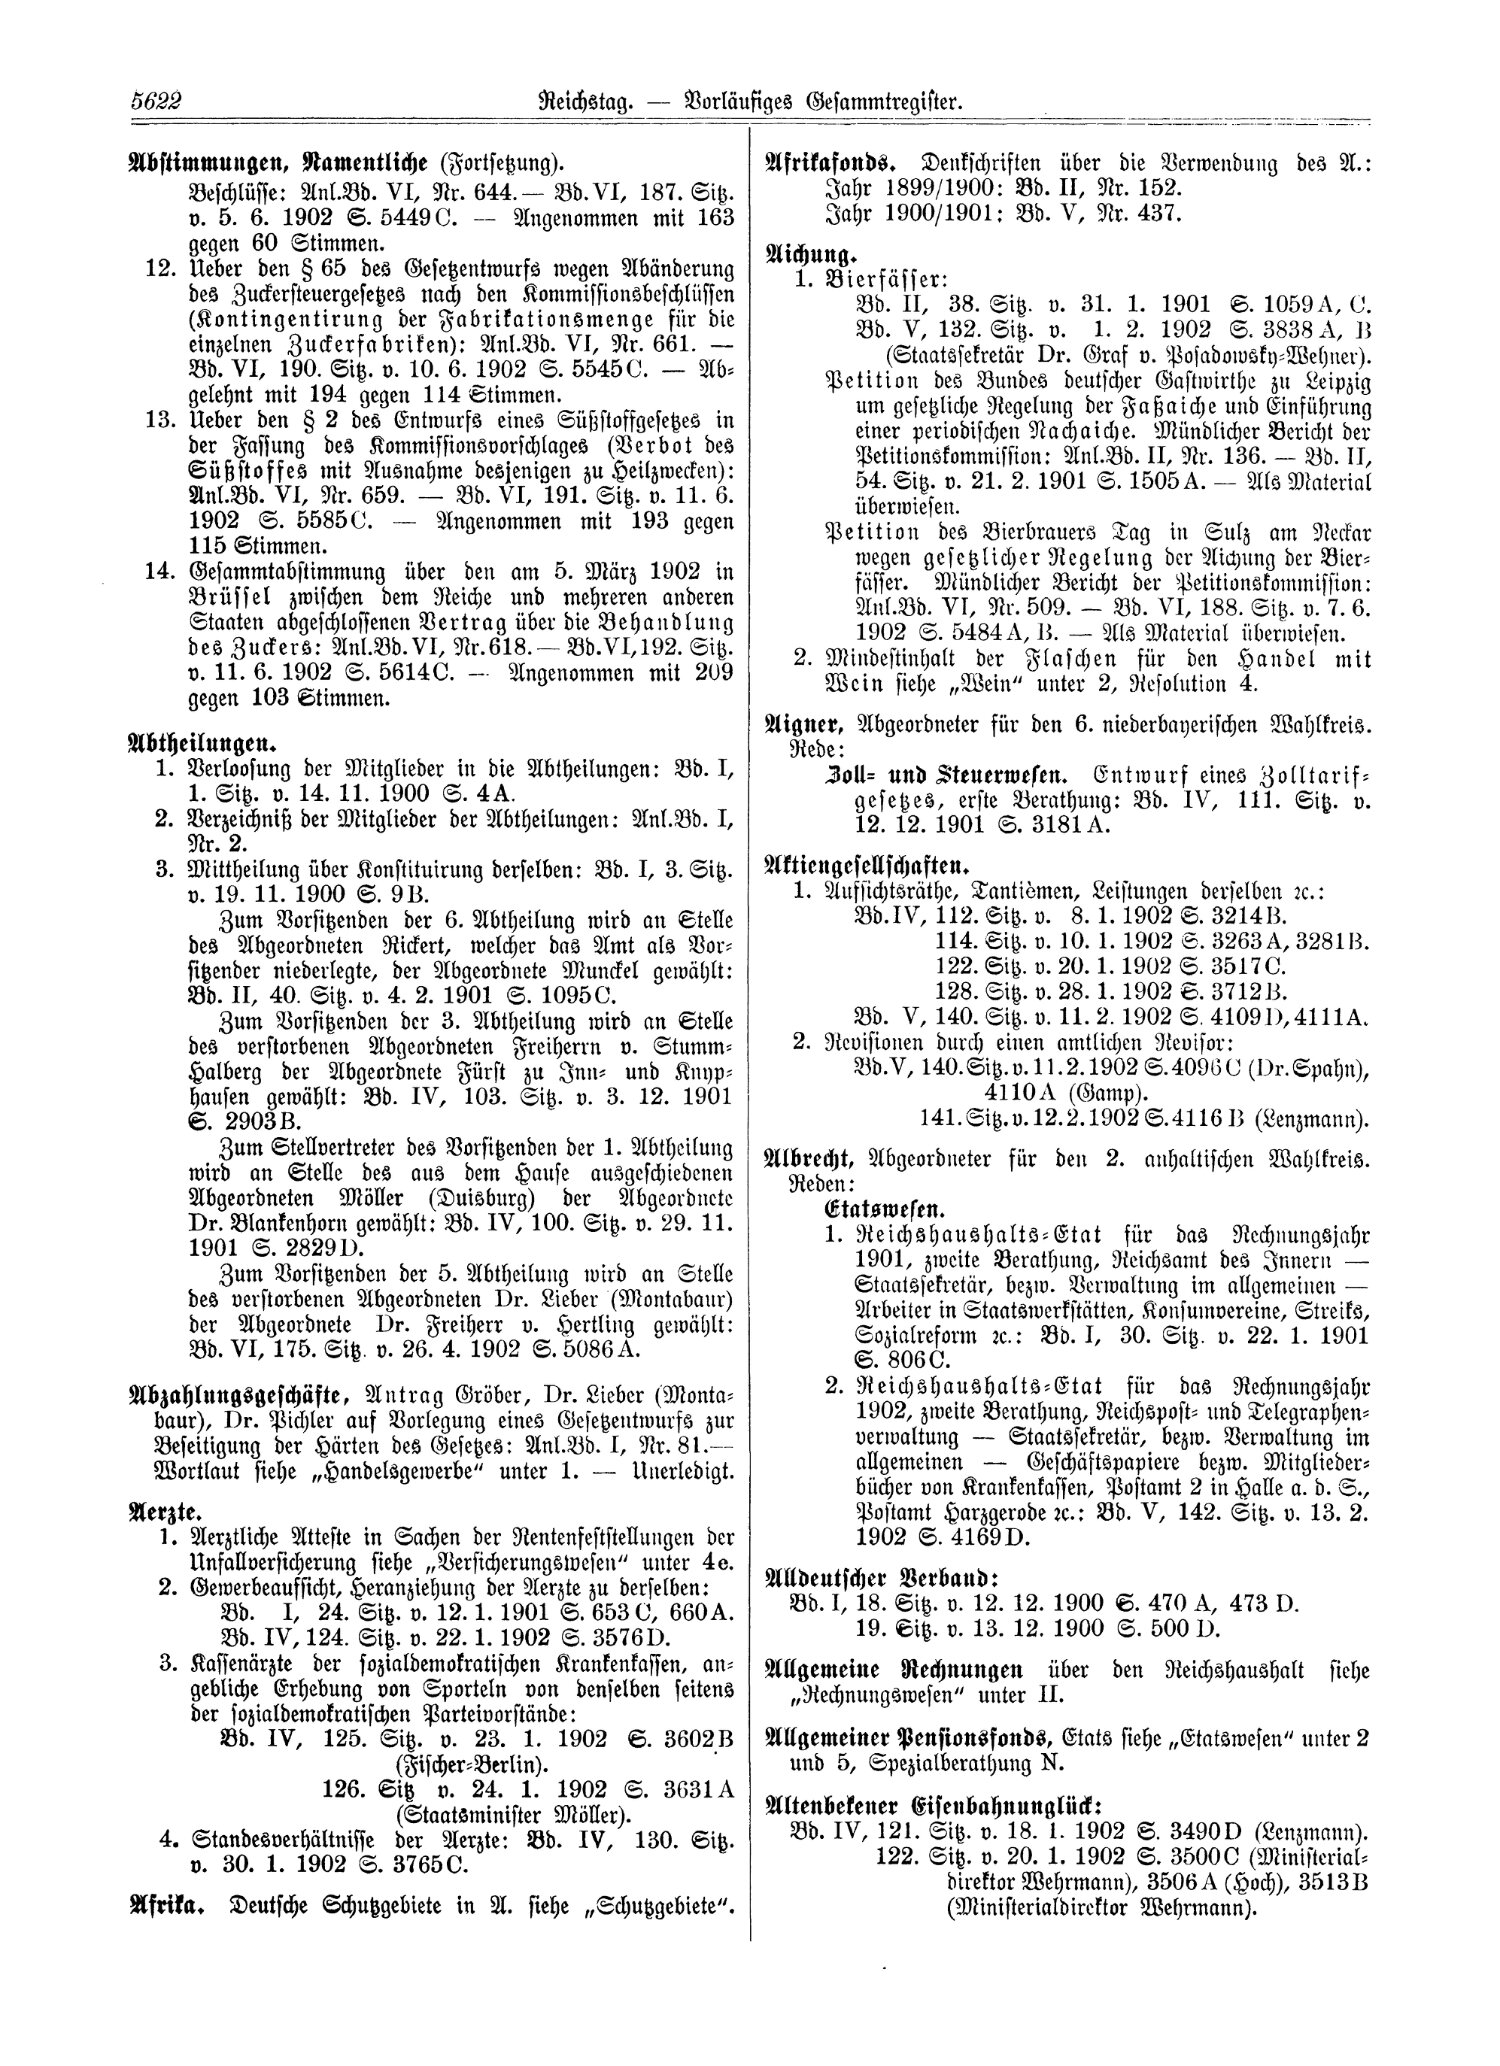 Scan of page 5622